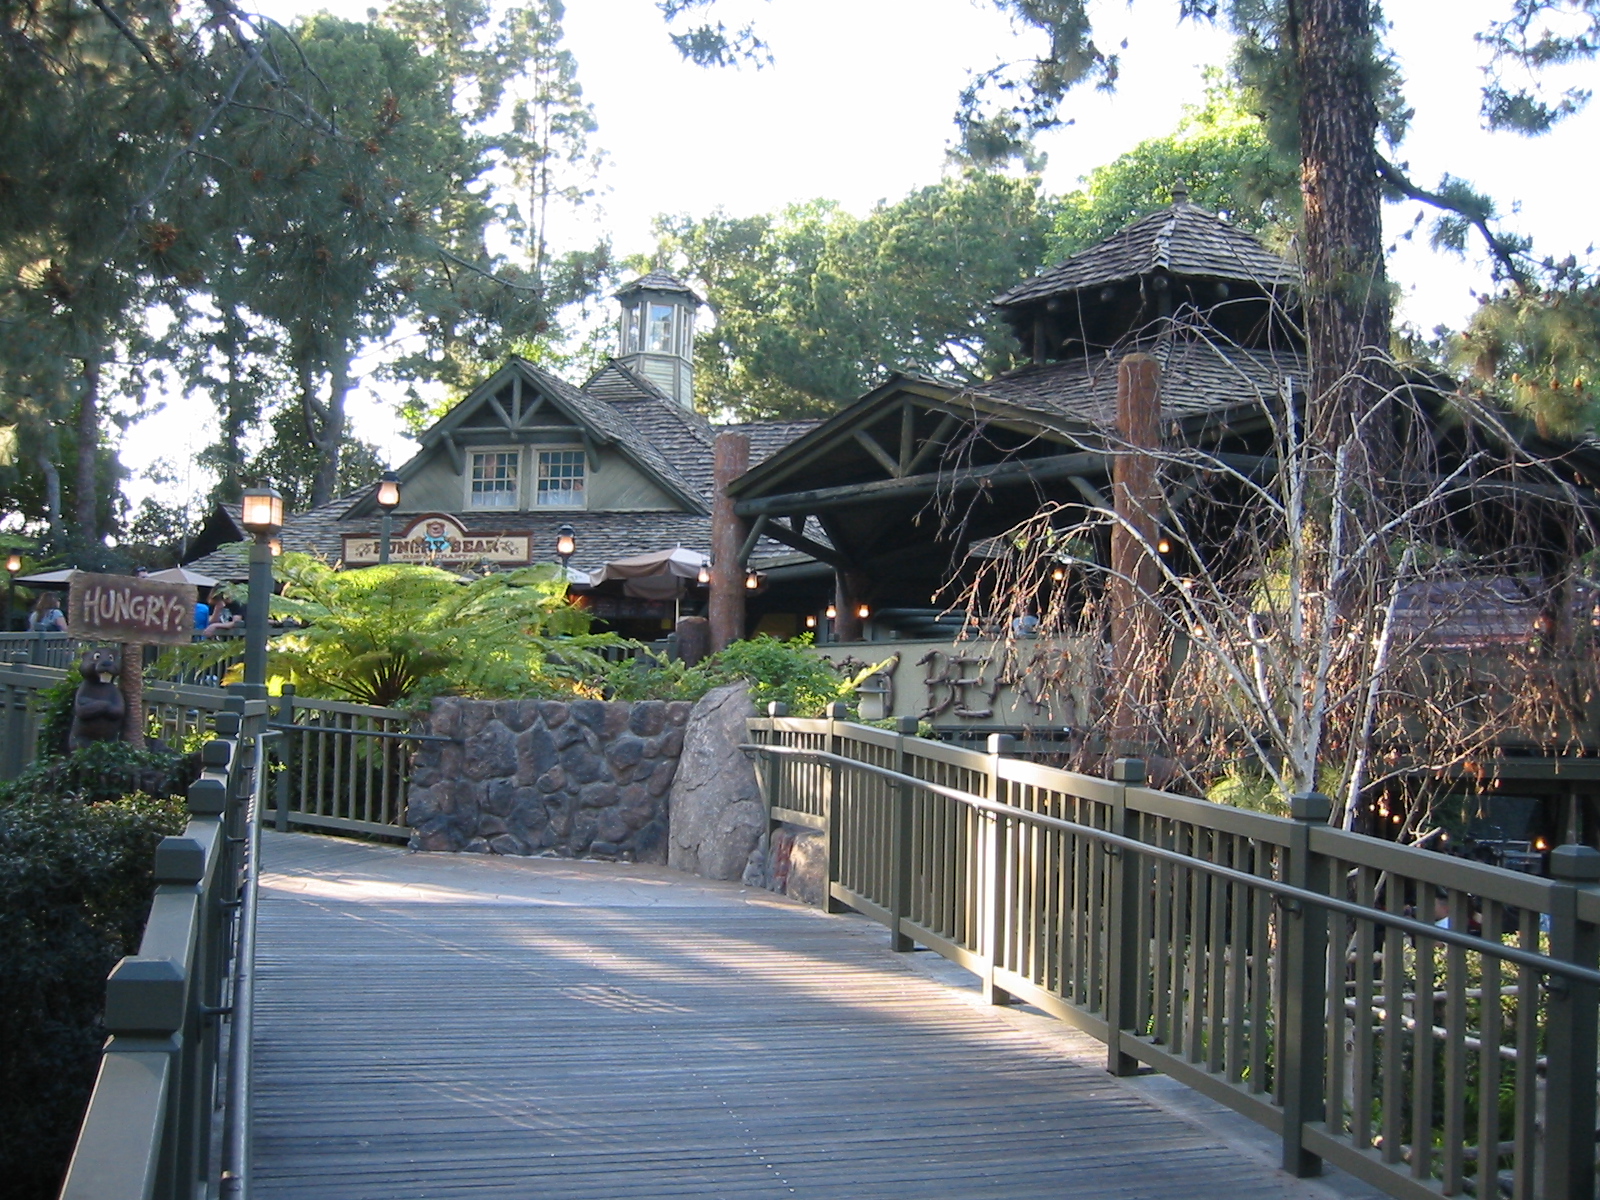 Hungry Bear Restaurant - Critter Country